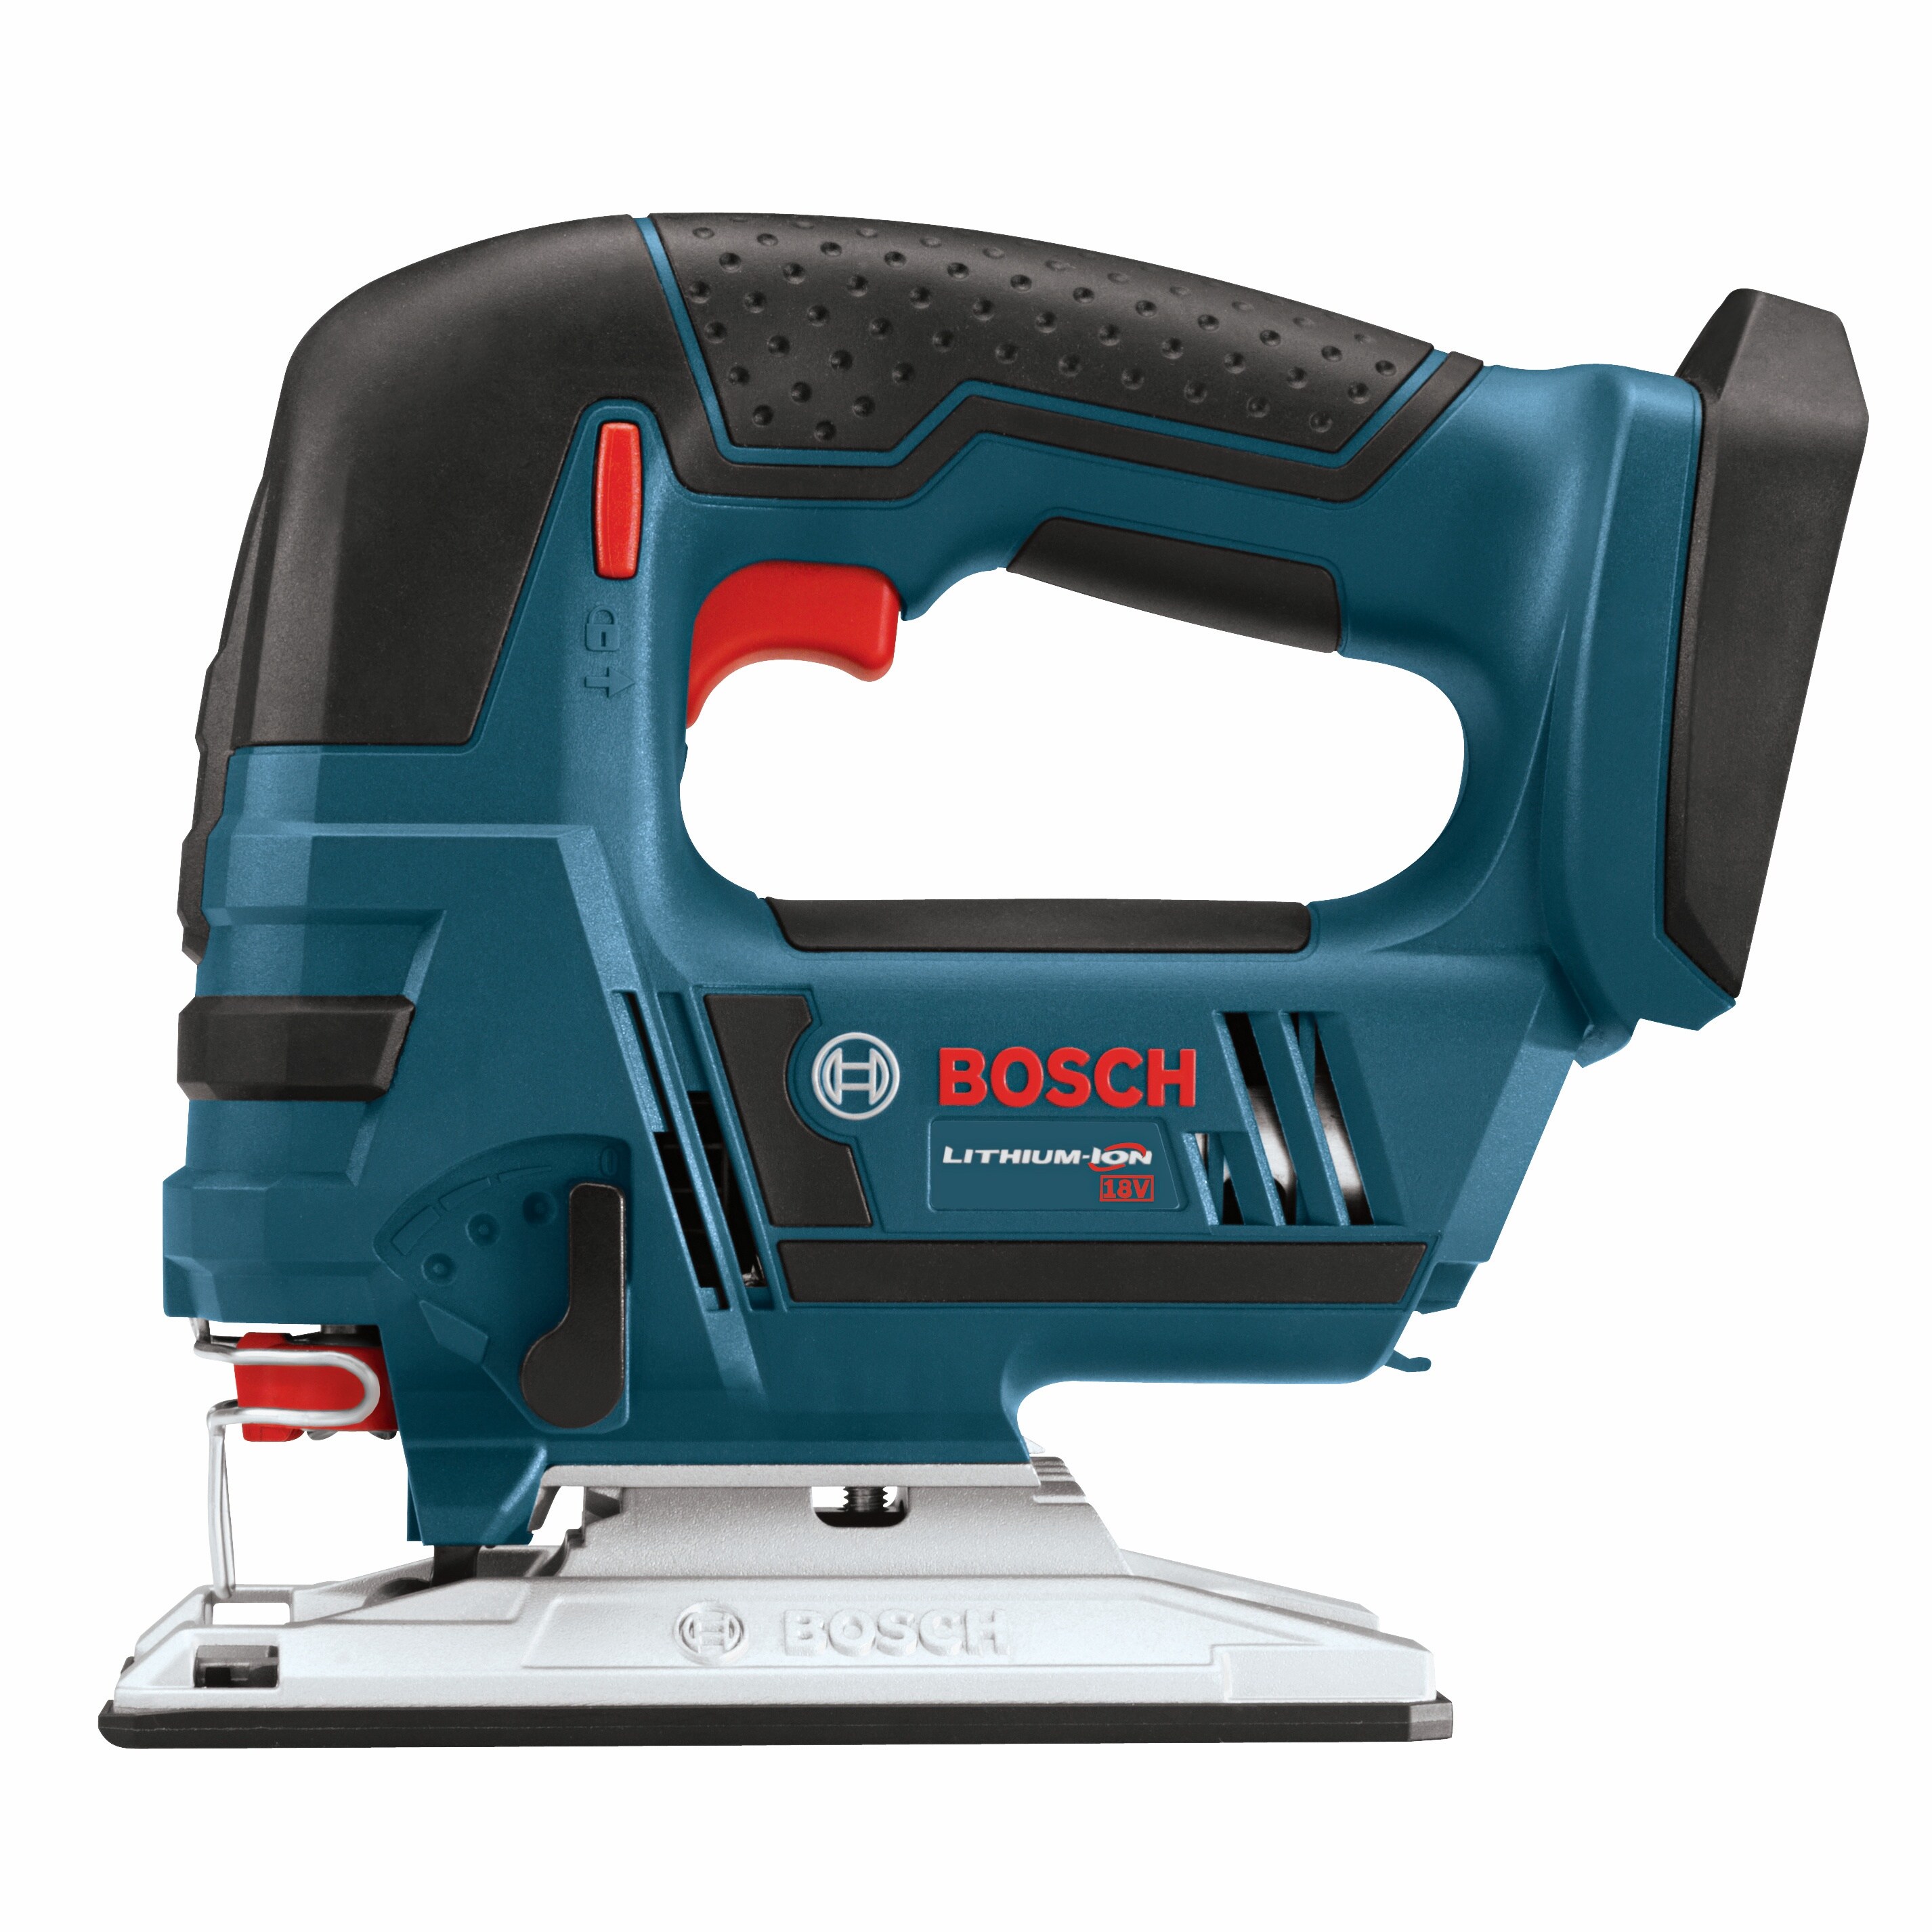 Expansion of the Professional 18V System: New cordless jigsaws from Bosch  for professionals - Bosch Media Service